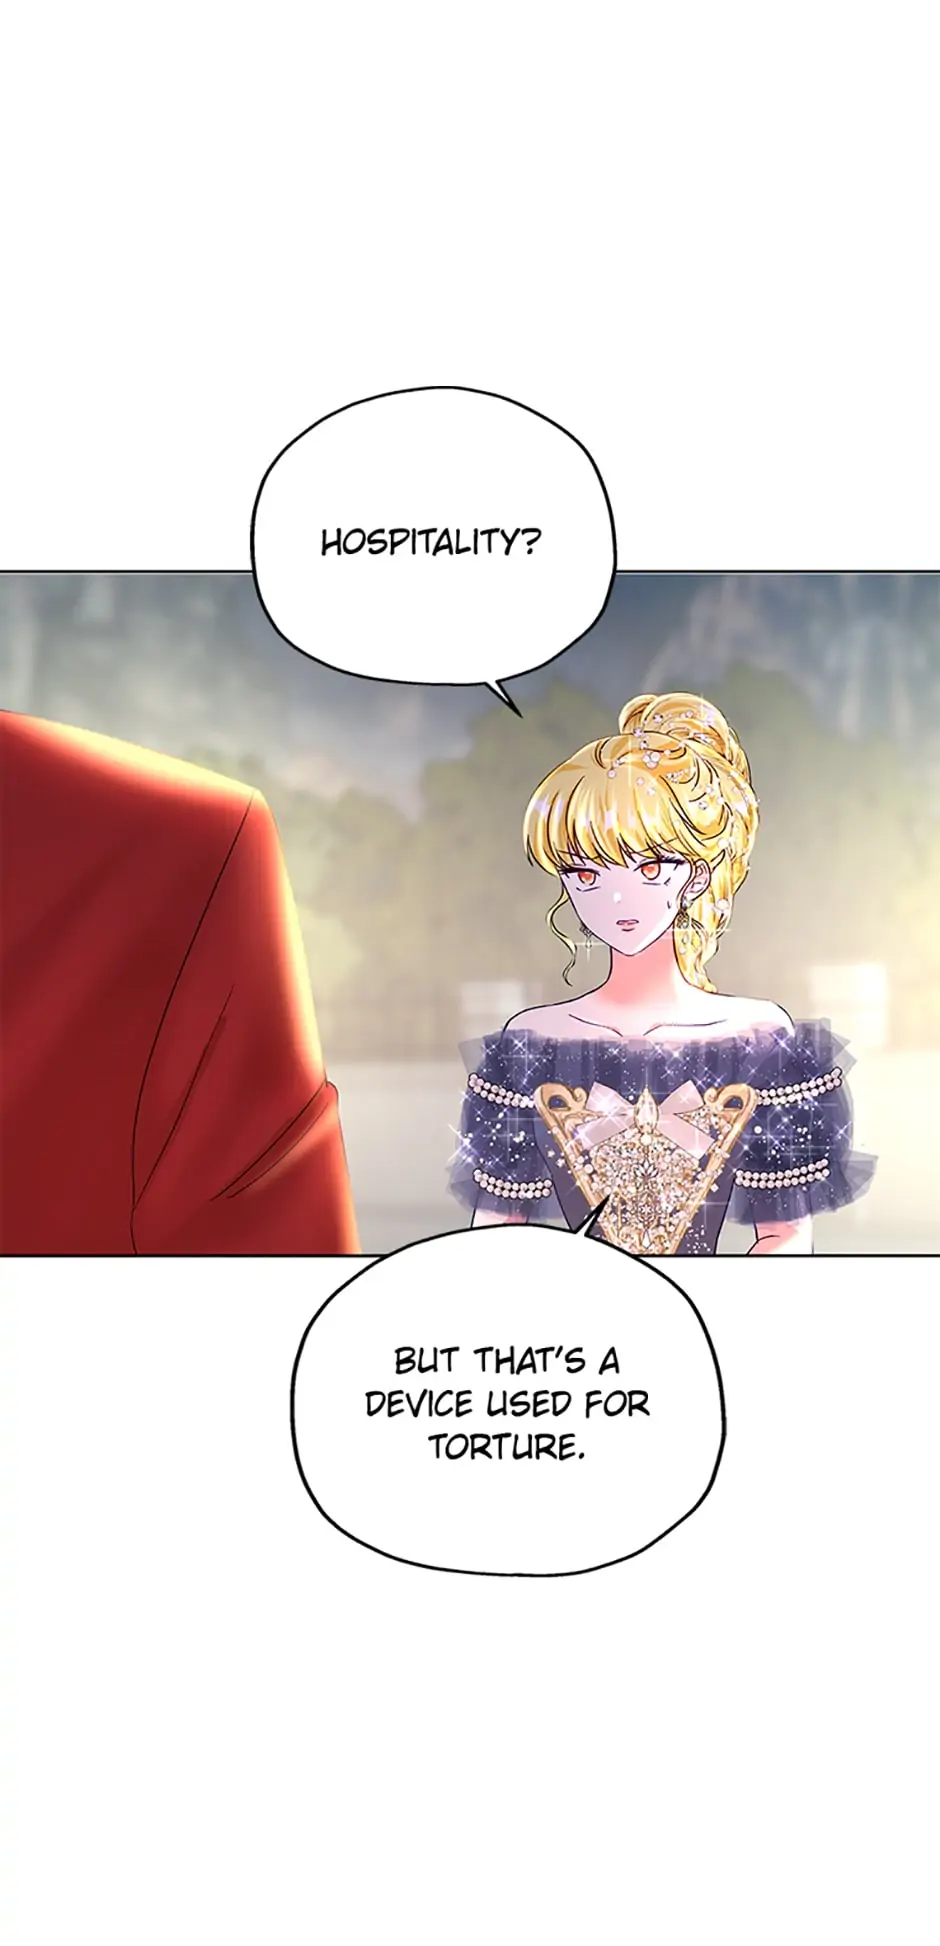 The Crownless Queen chapter 20